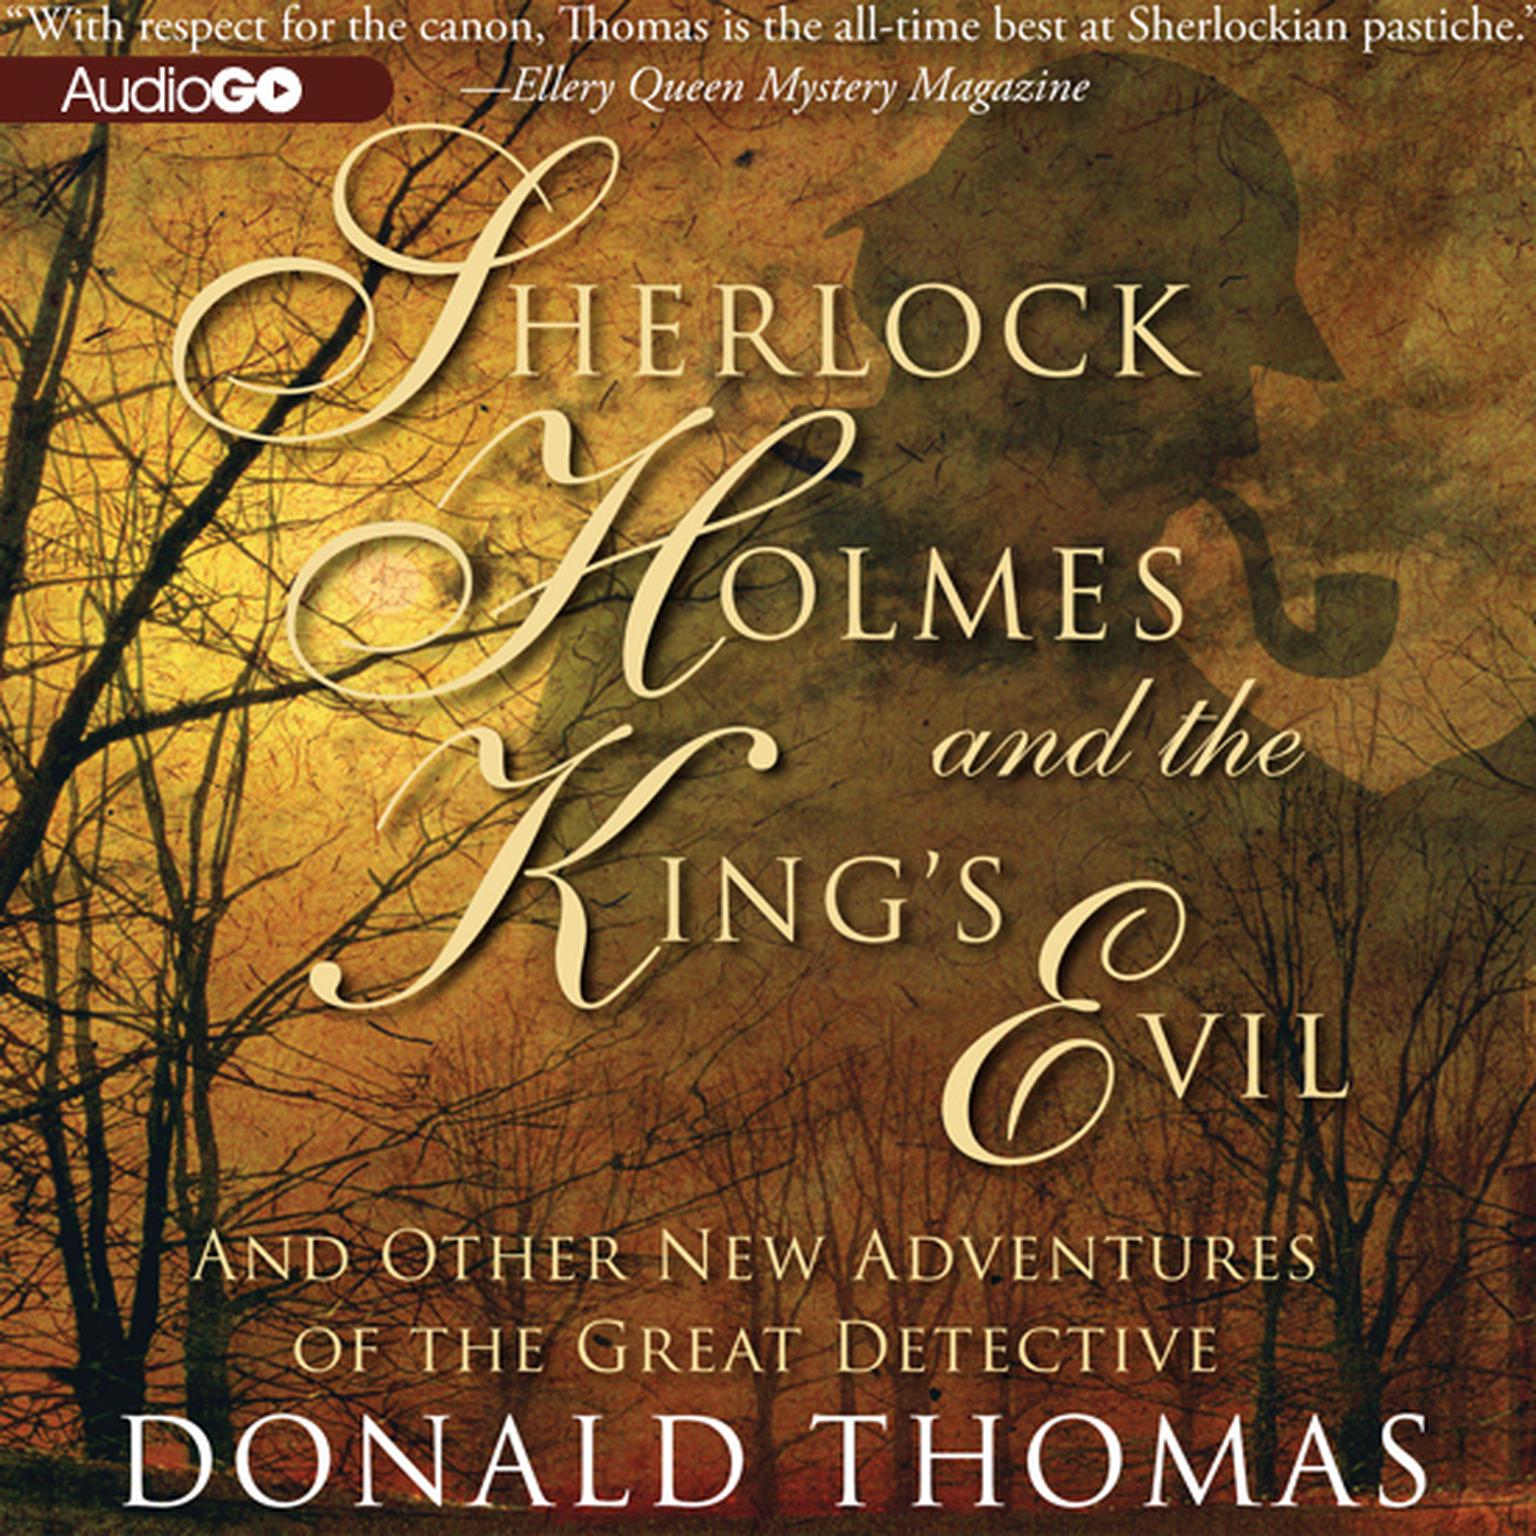 Sherlock Holmes and the King’s Evil: And Other New Adventures of the Great Detective Audiobook, by Donald Thomas